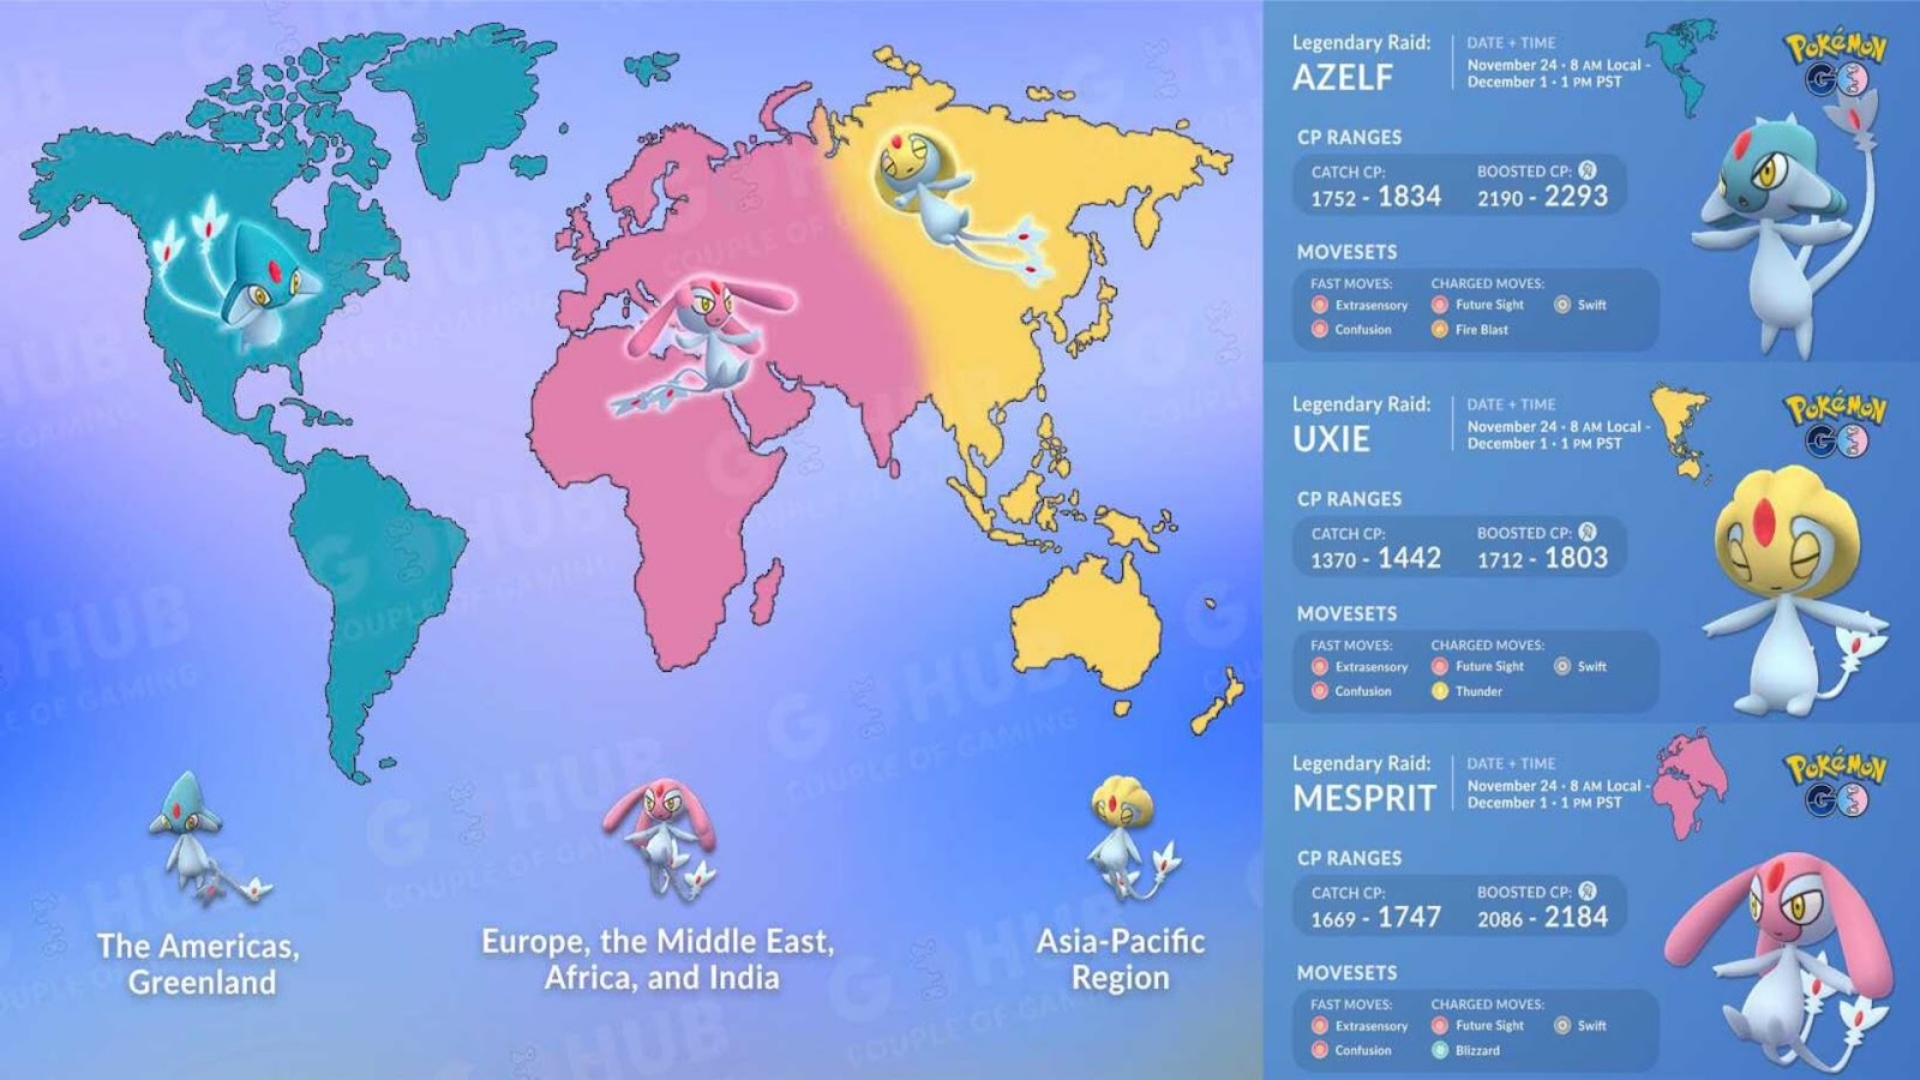 Where to get Uxie, Mesprit, and Azelf in Pokemon GO